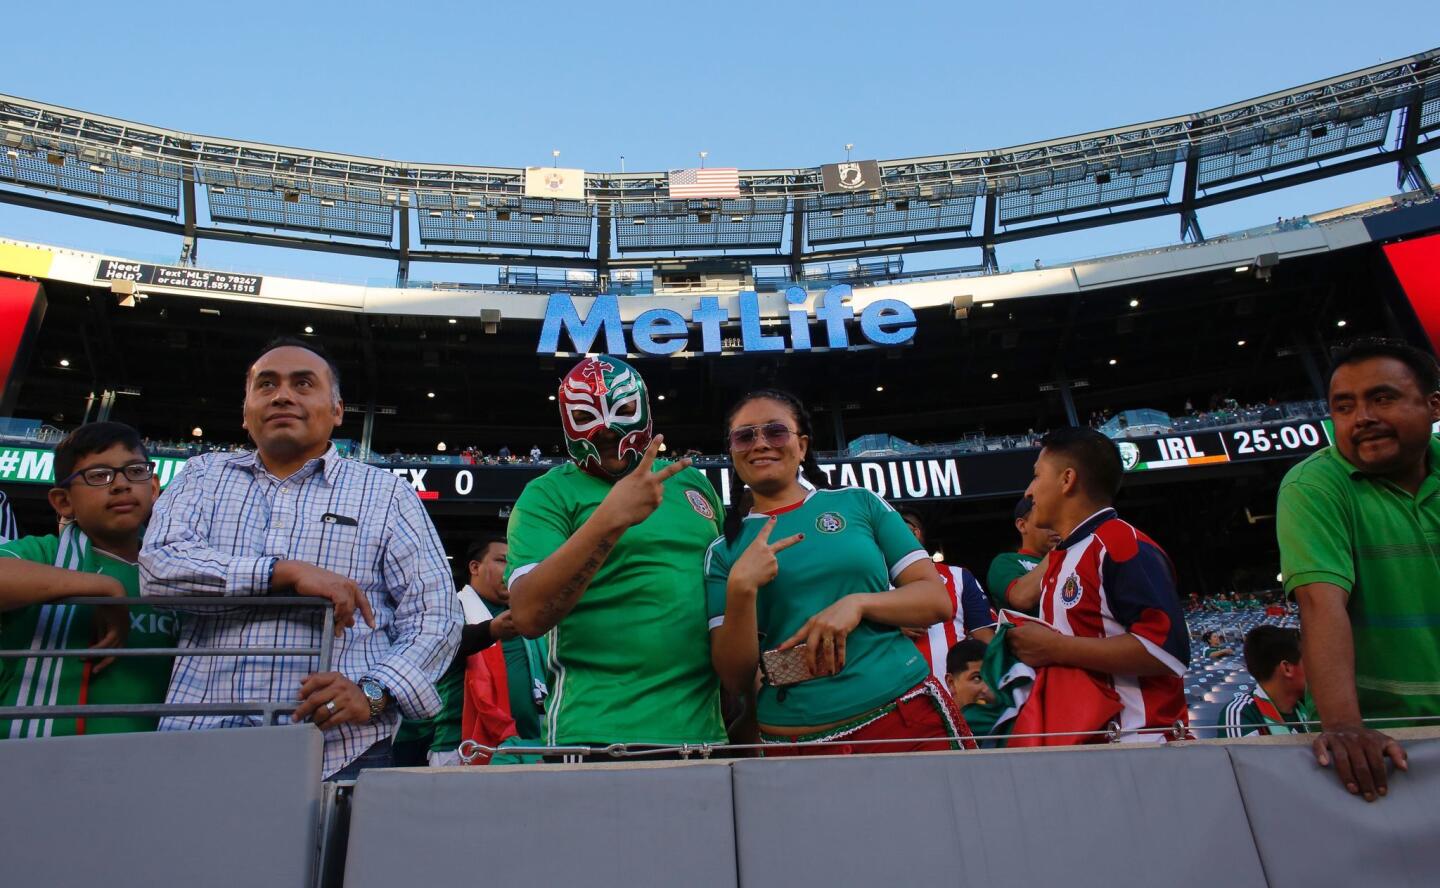 Fans of the National soccer team from Mexico prepare for the friendly match between Mexico and the Republic of Ireland June 1, 2017 at MetLife Stadium in East Rutherford, New Jersey. / AFP PHOTO / Kena BetancurKENA BETANCUR/AFP/Getty Images ** OUTS - ELSENT, FPG, CM - OUTS * NM, PH, VA if sourced by CT, LA or MoD **